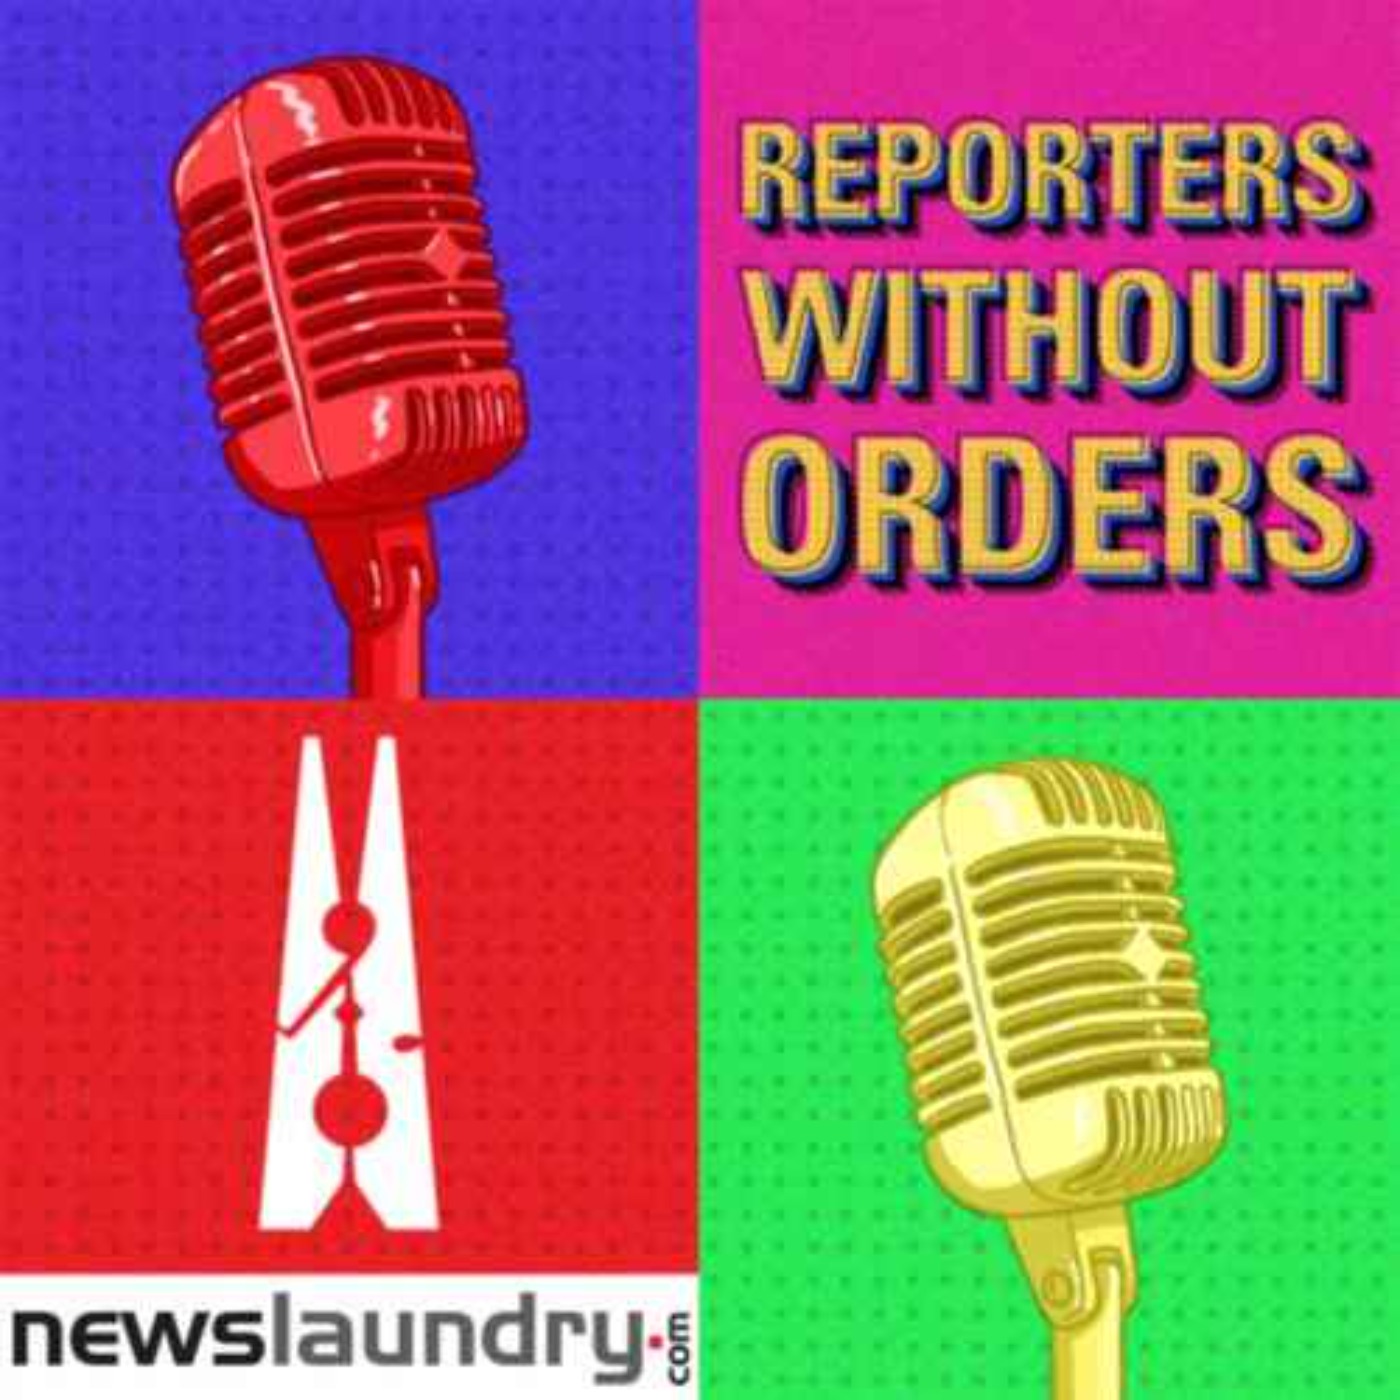 Reporters Without Orders Ep 198: Jharkhand lynchings, death toll in farmer protests